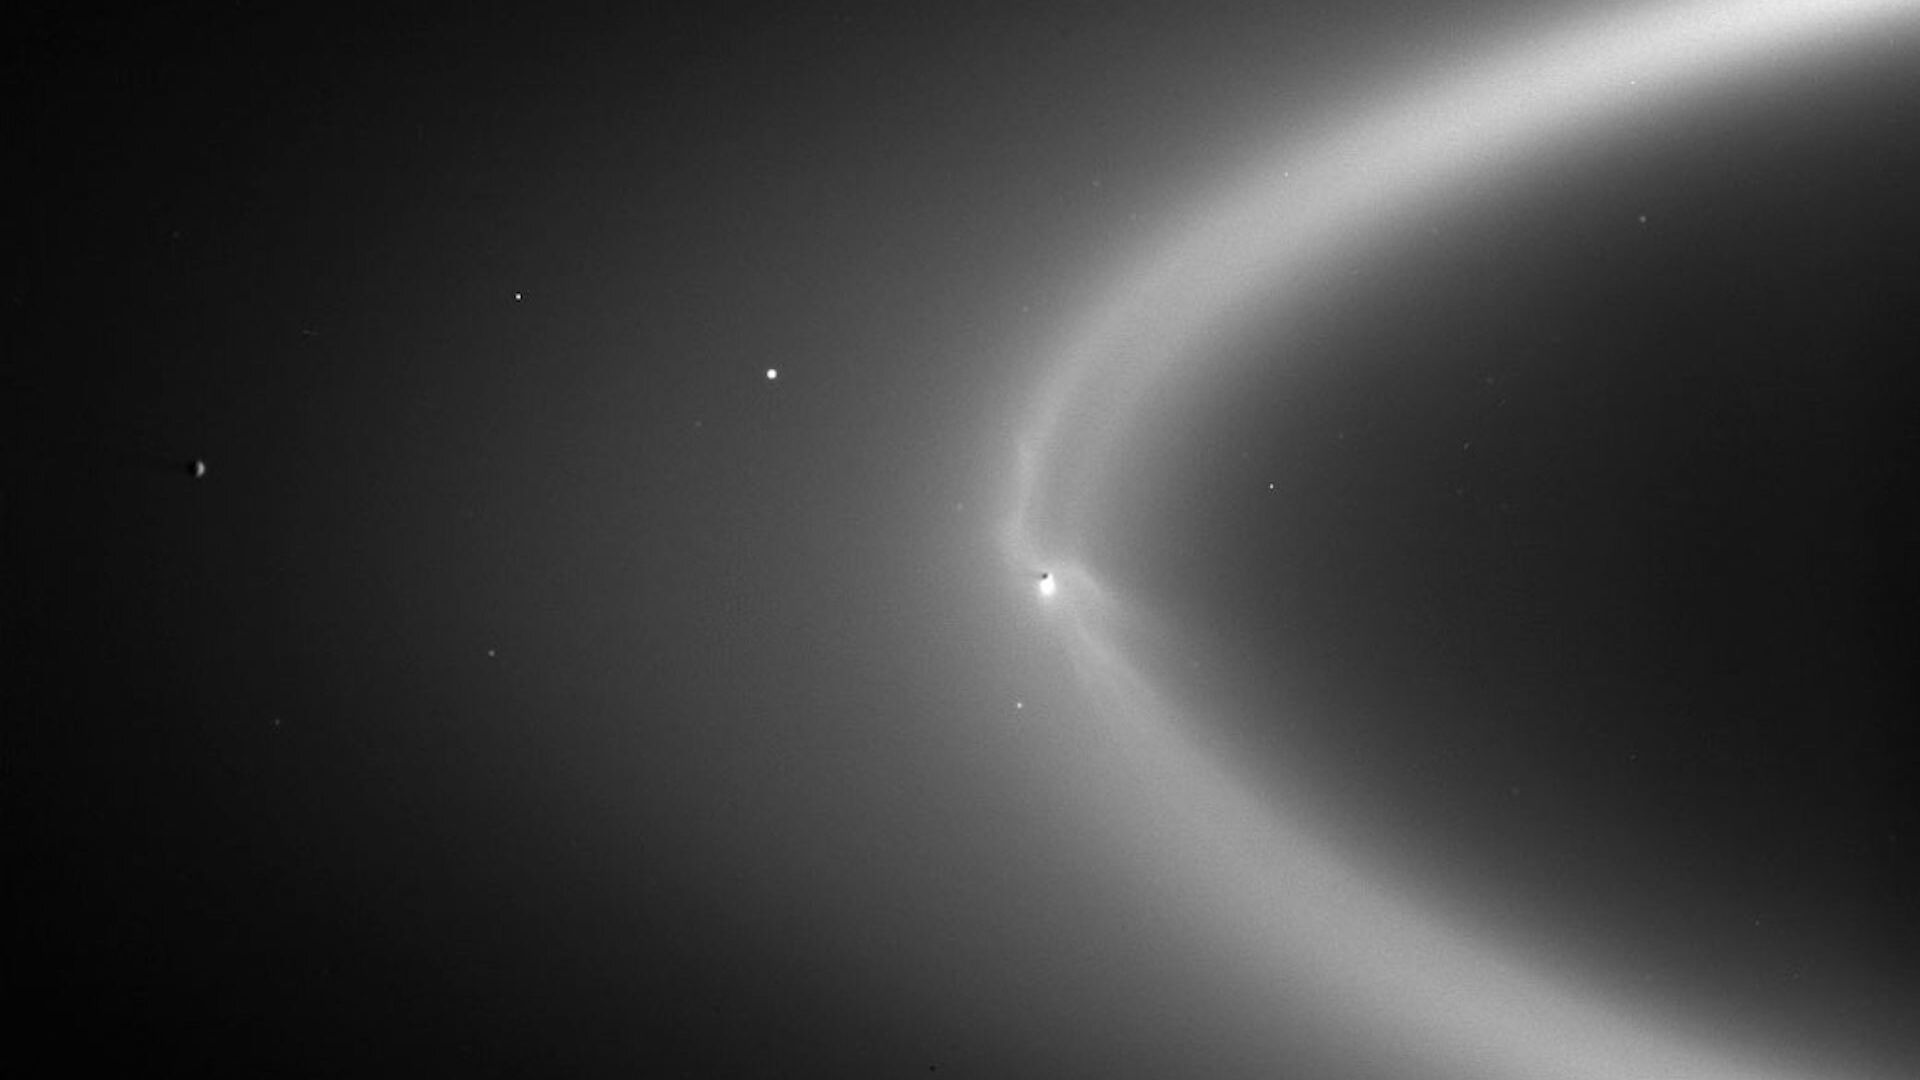  Saturn’s E ring is fed with icy particles from Enceladus’ plume. Credit: NASA/JPL-Caltech/Space Science Institute